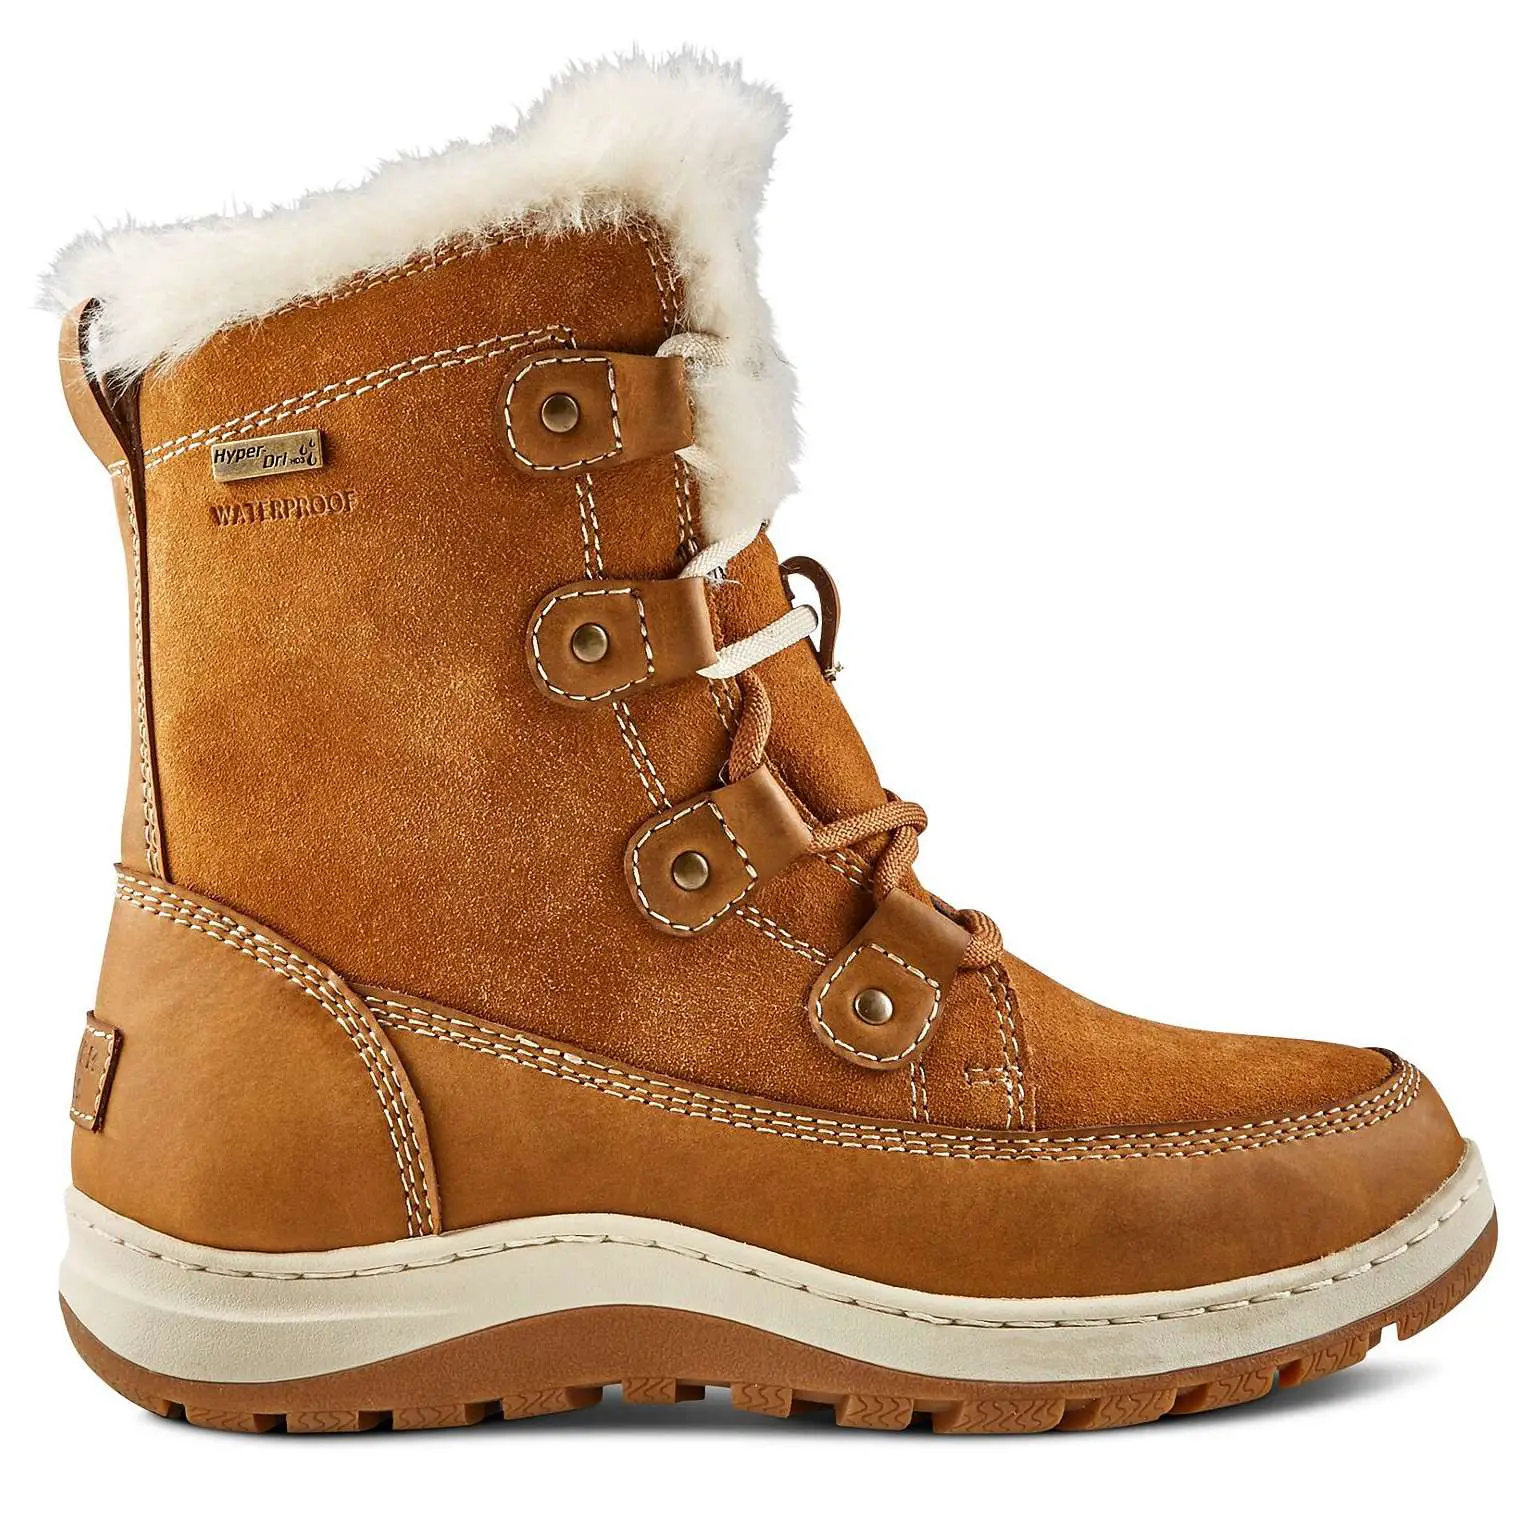 The Best Snow and Ice Boots for Women, According to ...